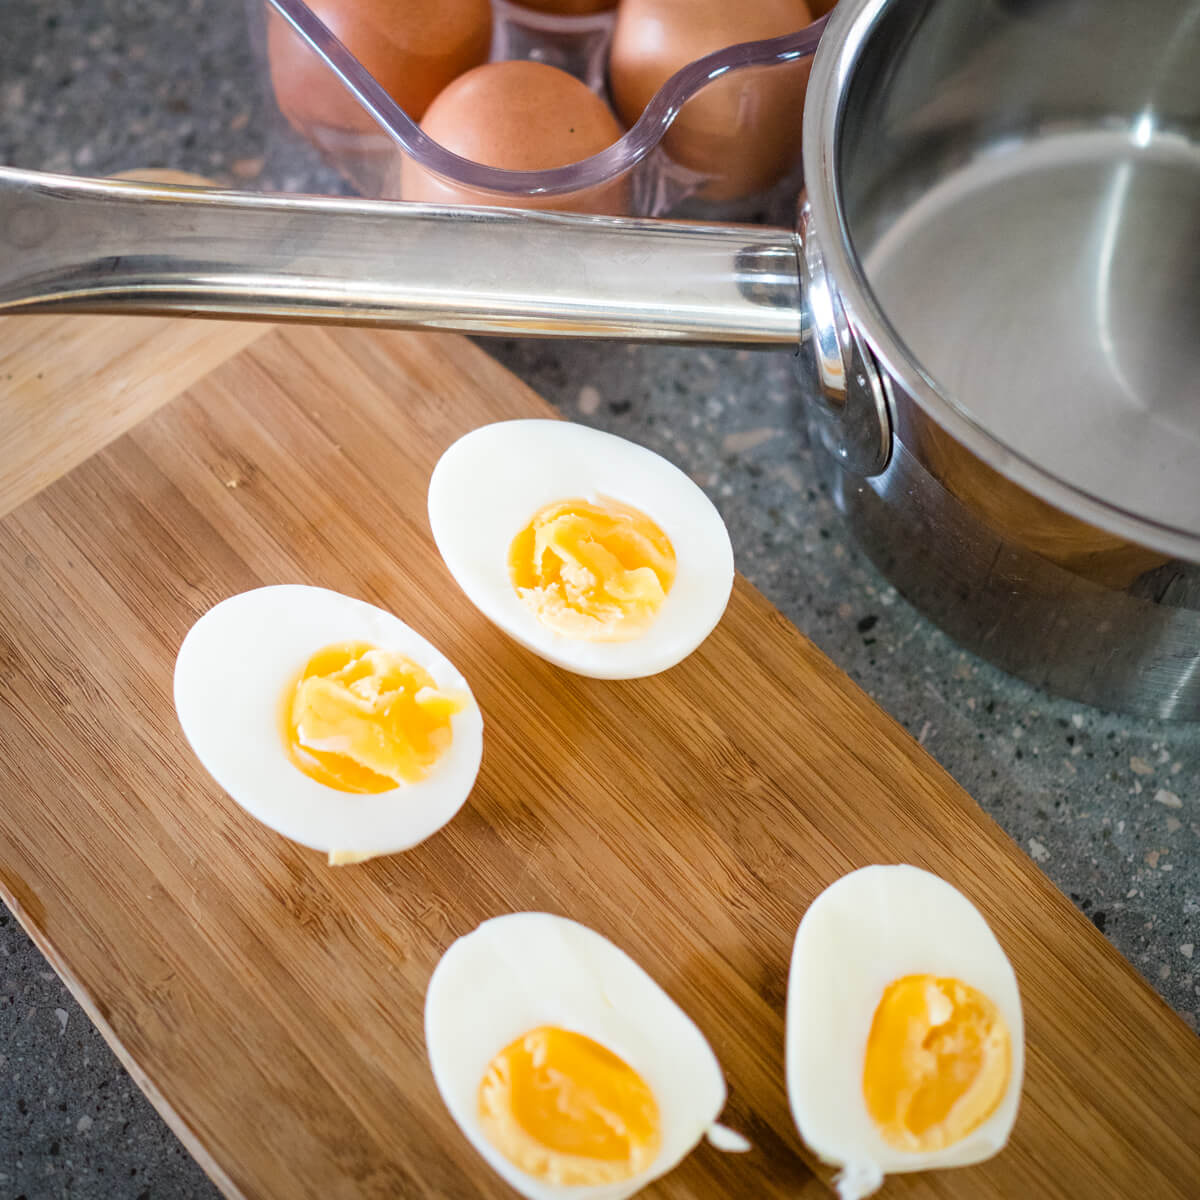 https://kidgredients.com.au/wp-content/uploads/2020/08/FEATURED-how-to-make-perfect-hard-boiled-eggs.jpg